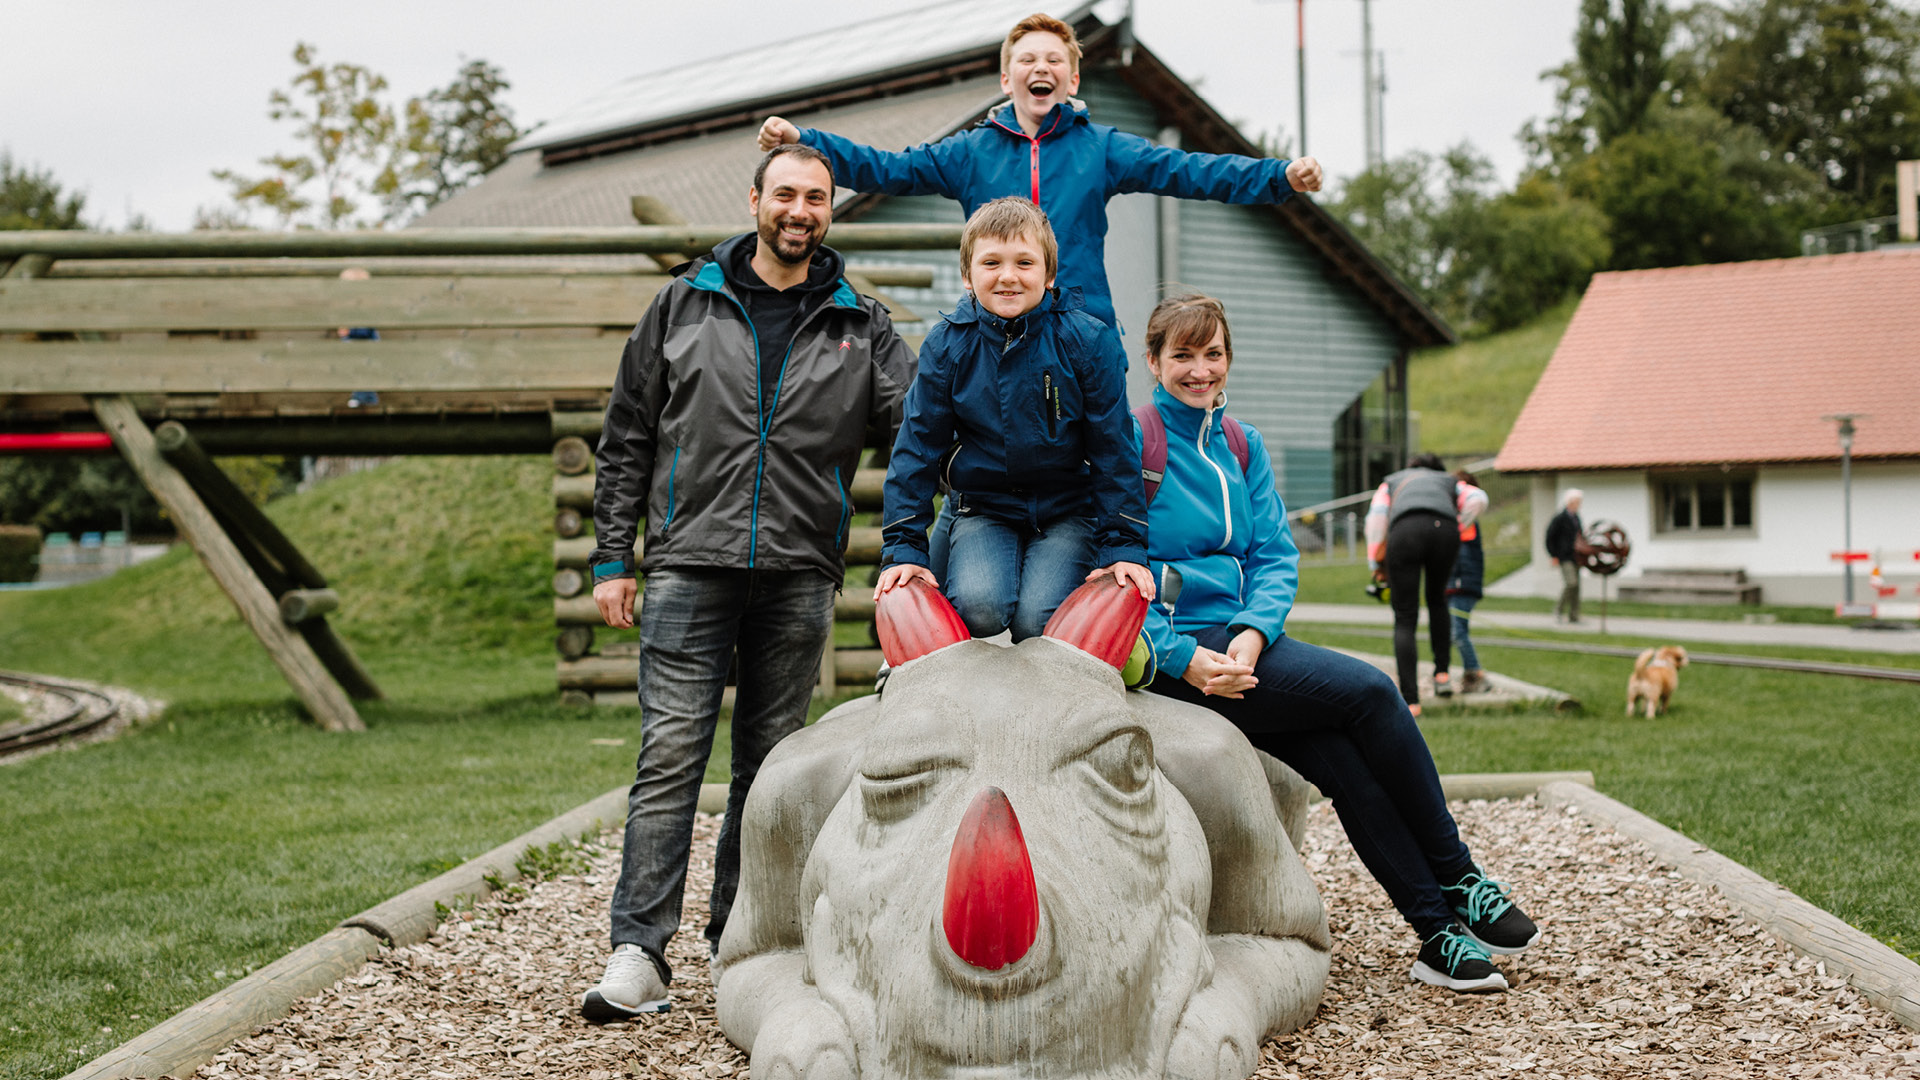 A family poses on the concrete dragon at the playground